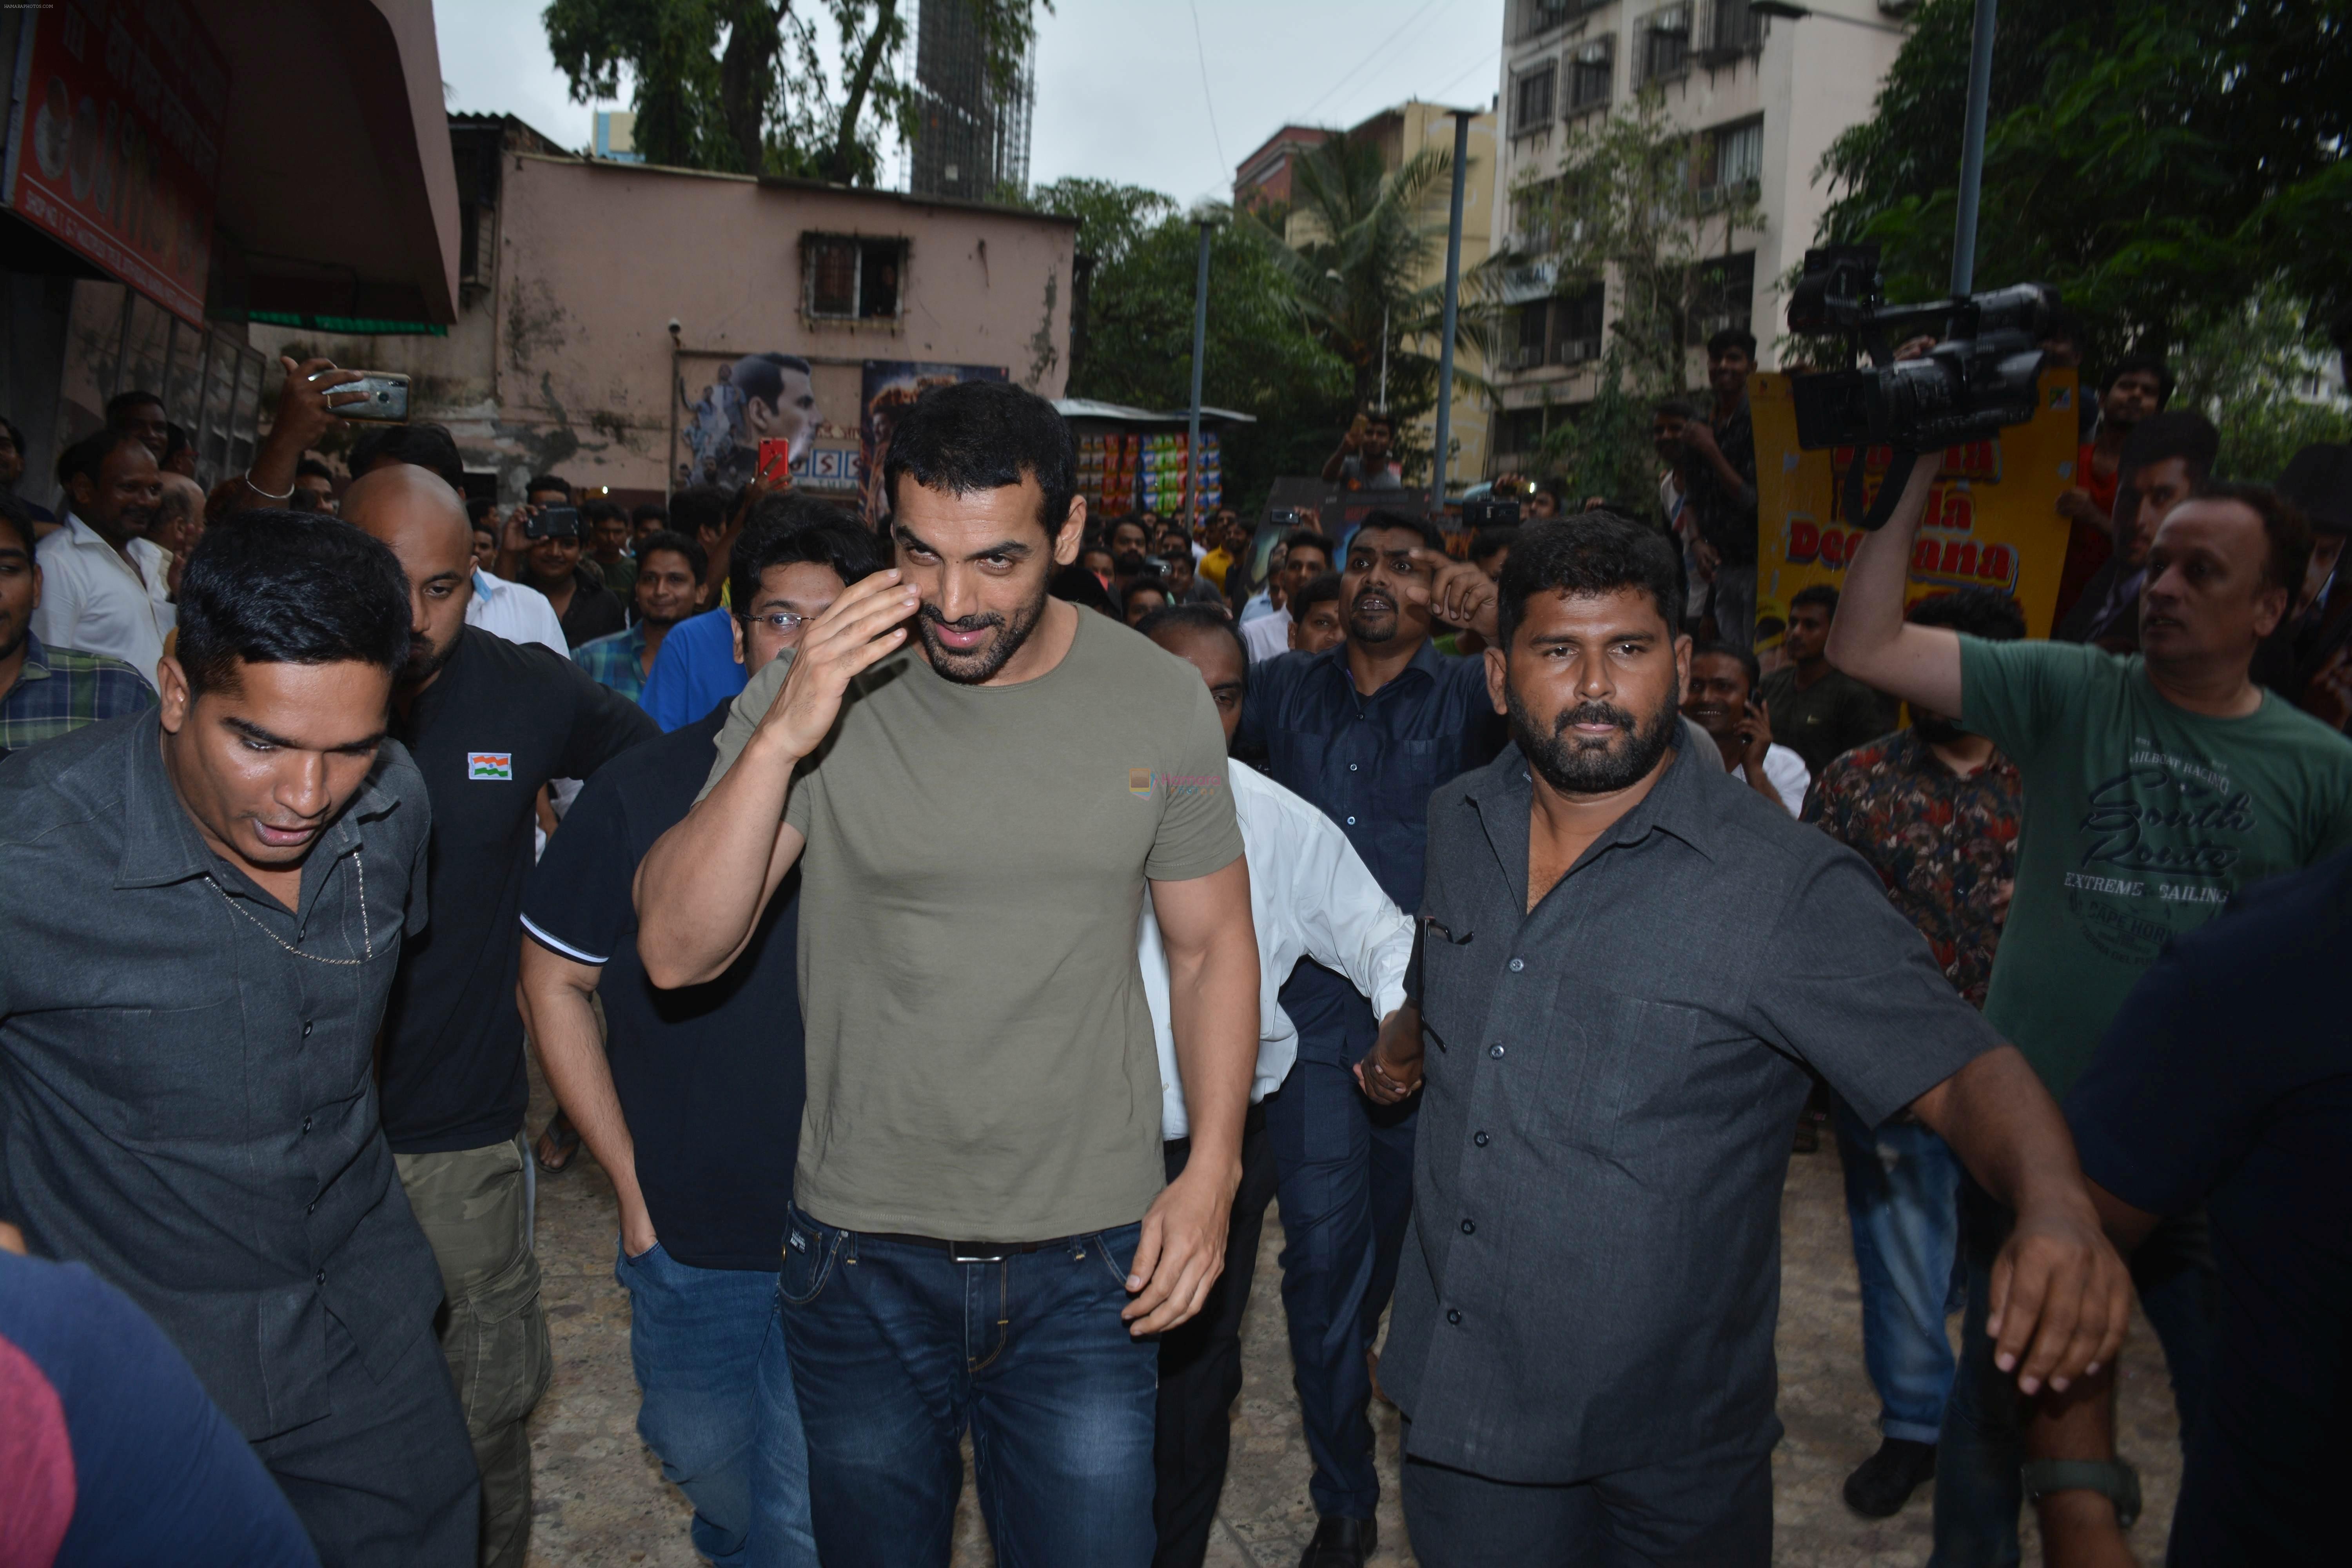 John Abraham visits the Gaiety theatre in bandra to check the audience response to his film Satyamev Jayate on 15th Aug 2018